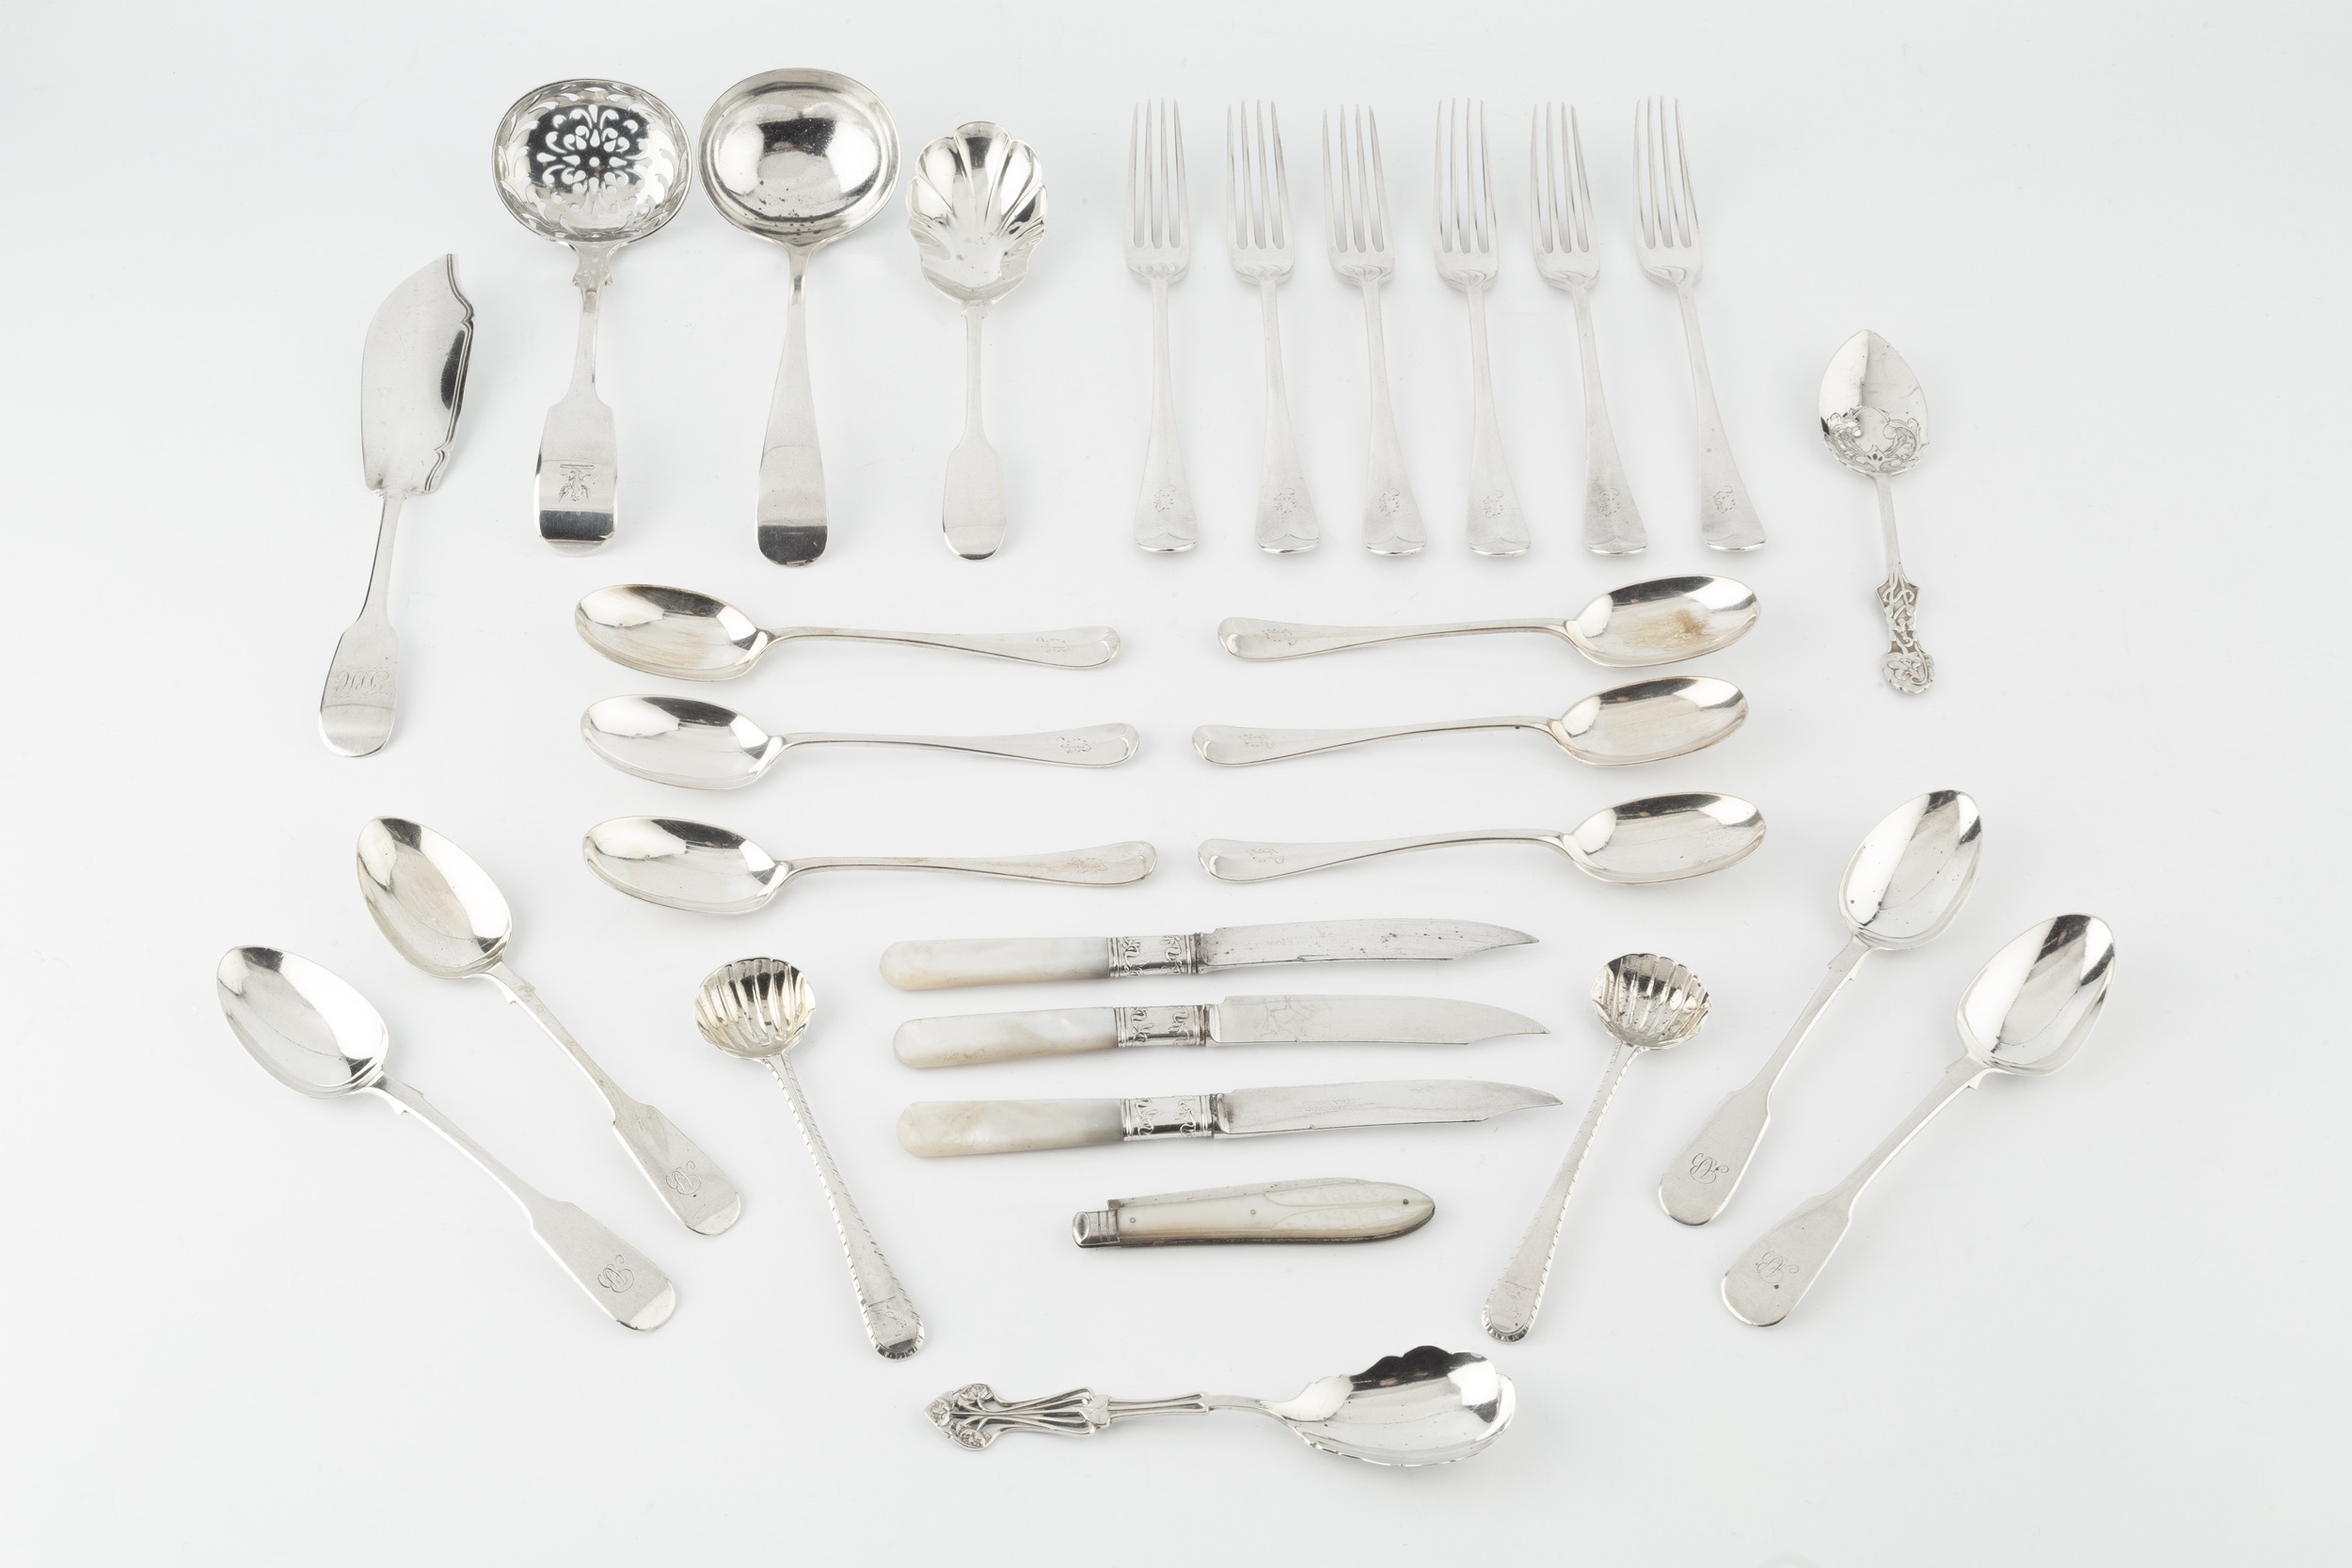 A set of six George V silver Hanoverian pattern dessert forks, and six matching teaspoons by John